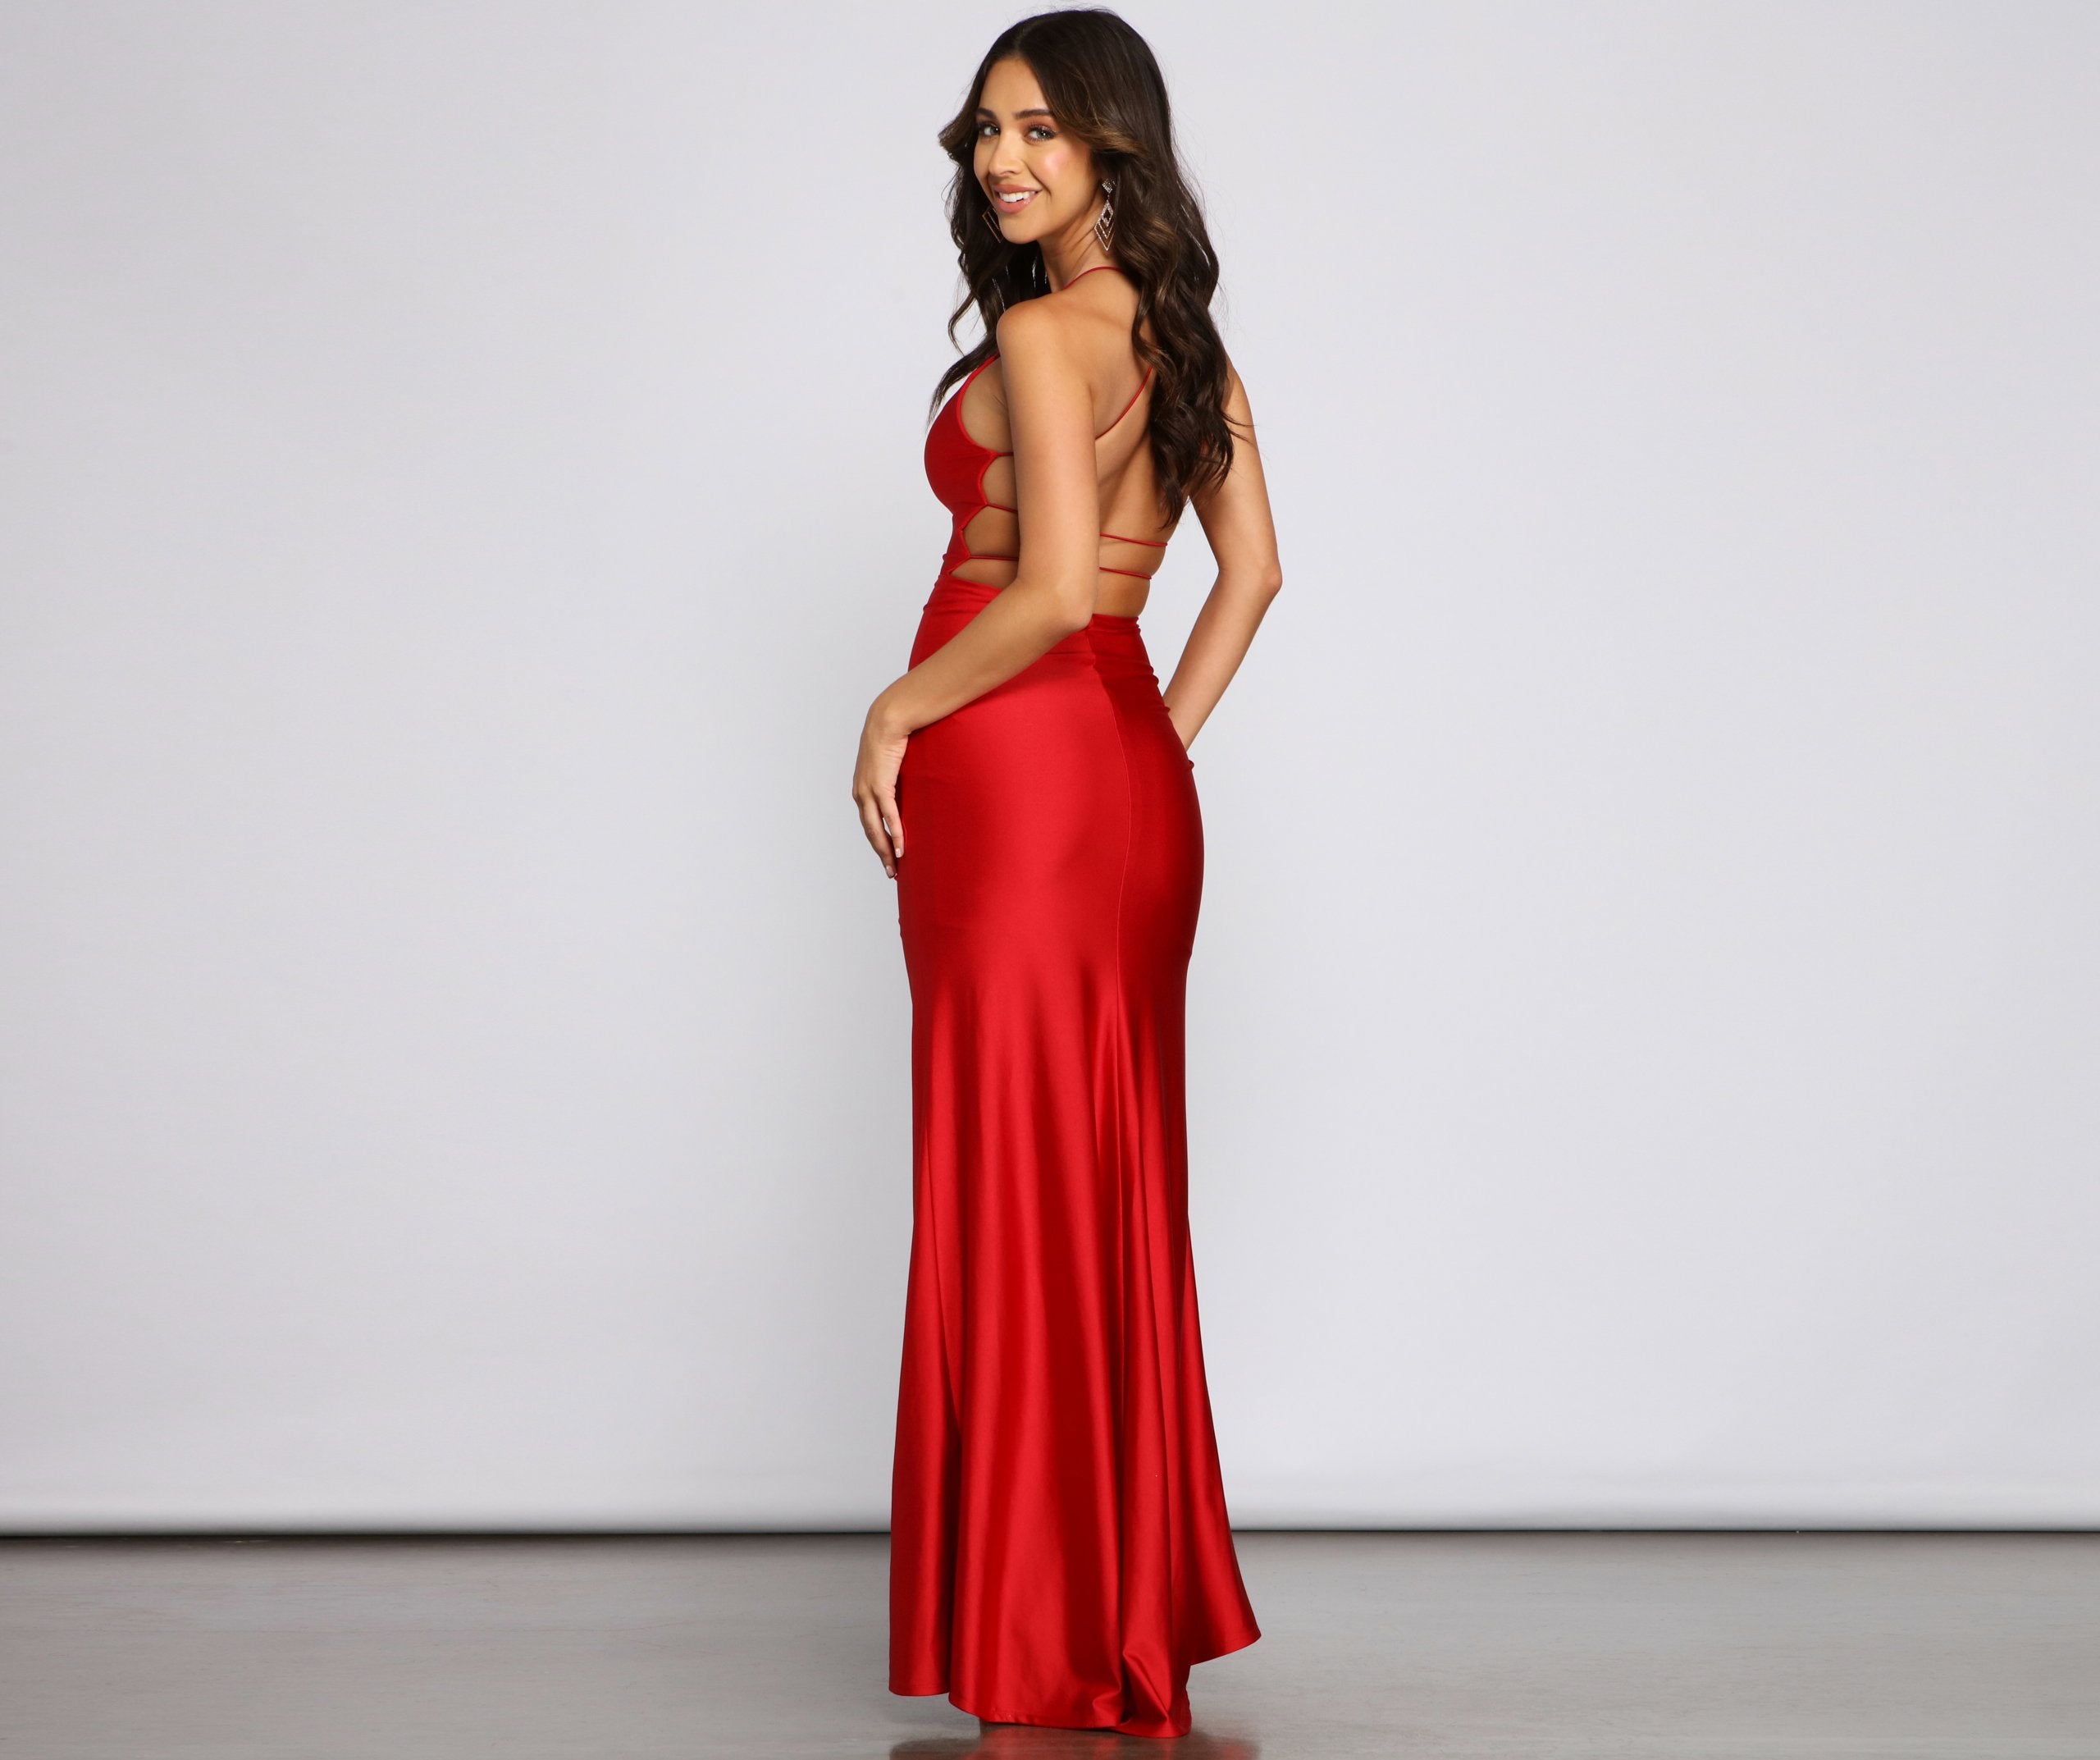 Whitney Formal High-Slit Mermaid Dress - Lady Occasions